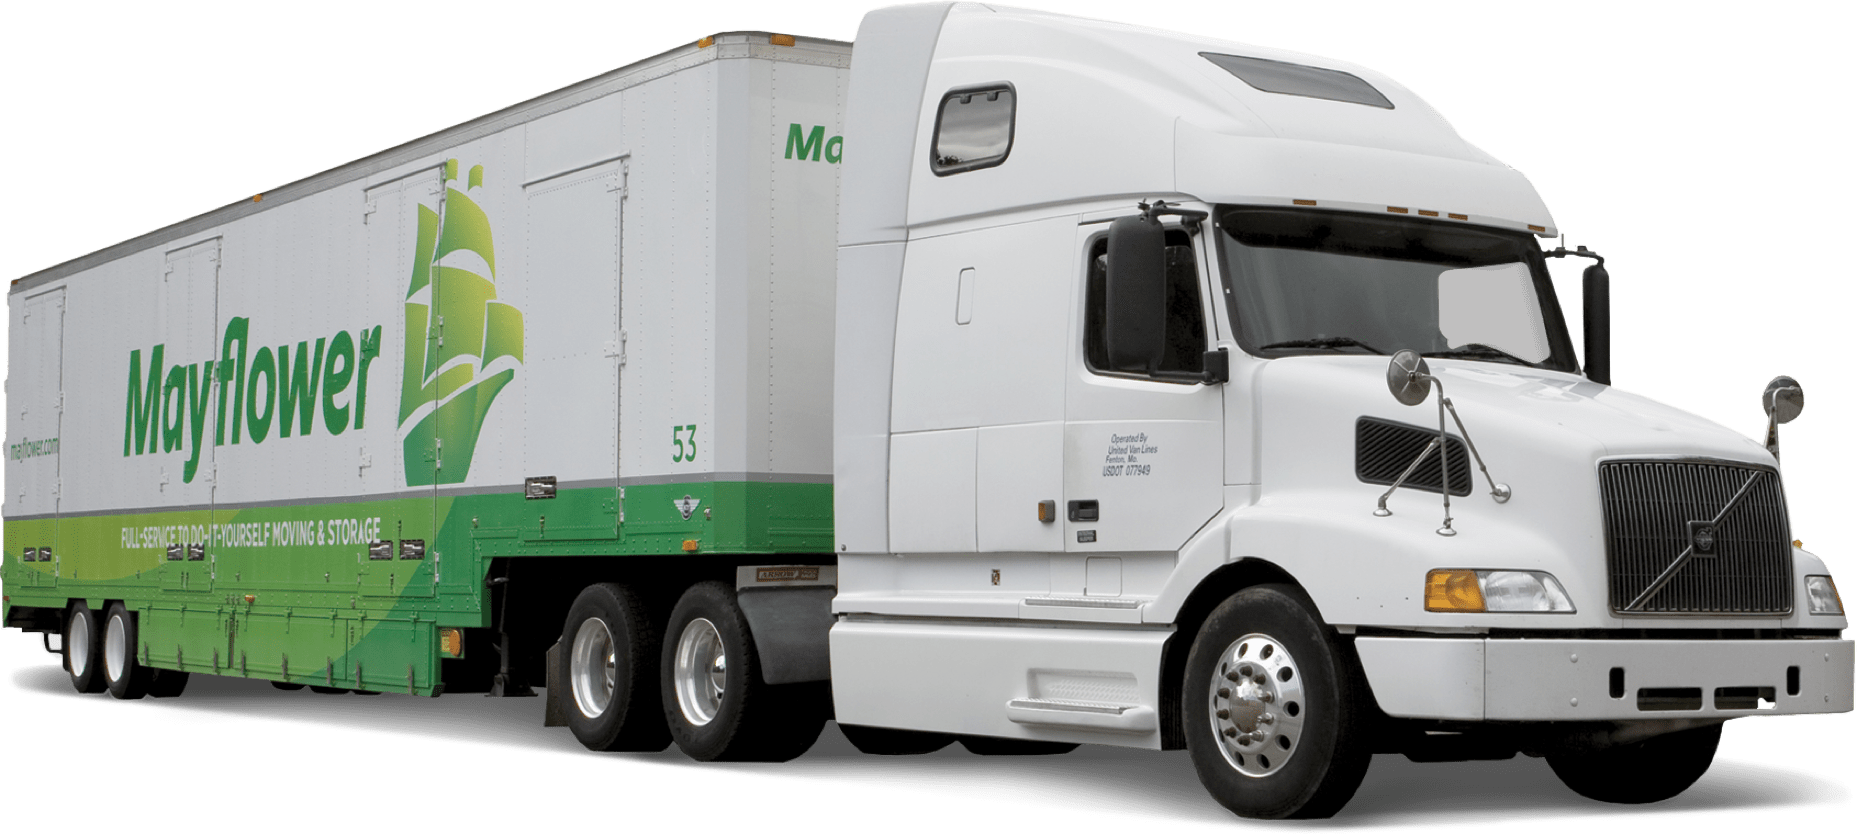 Mayflower moving truck with no background - Mayflower®